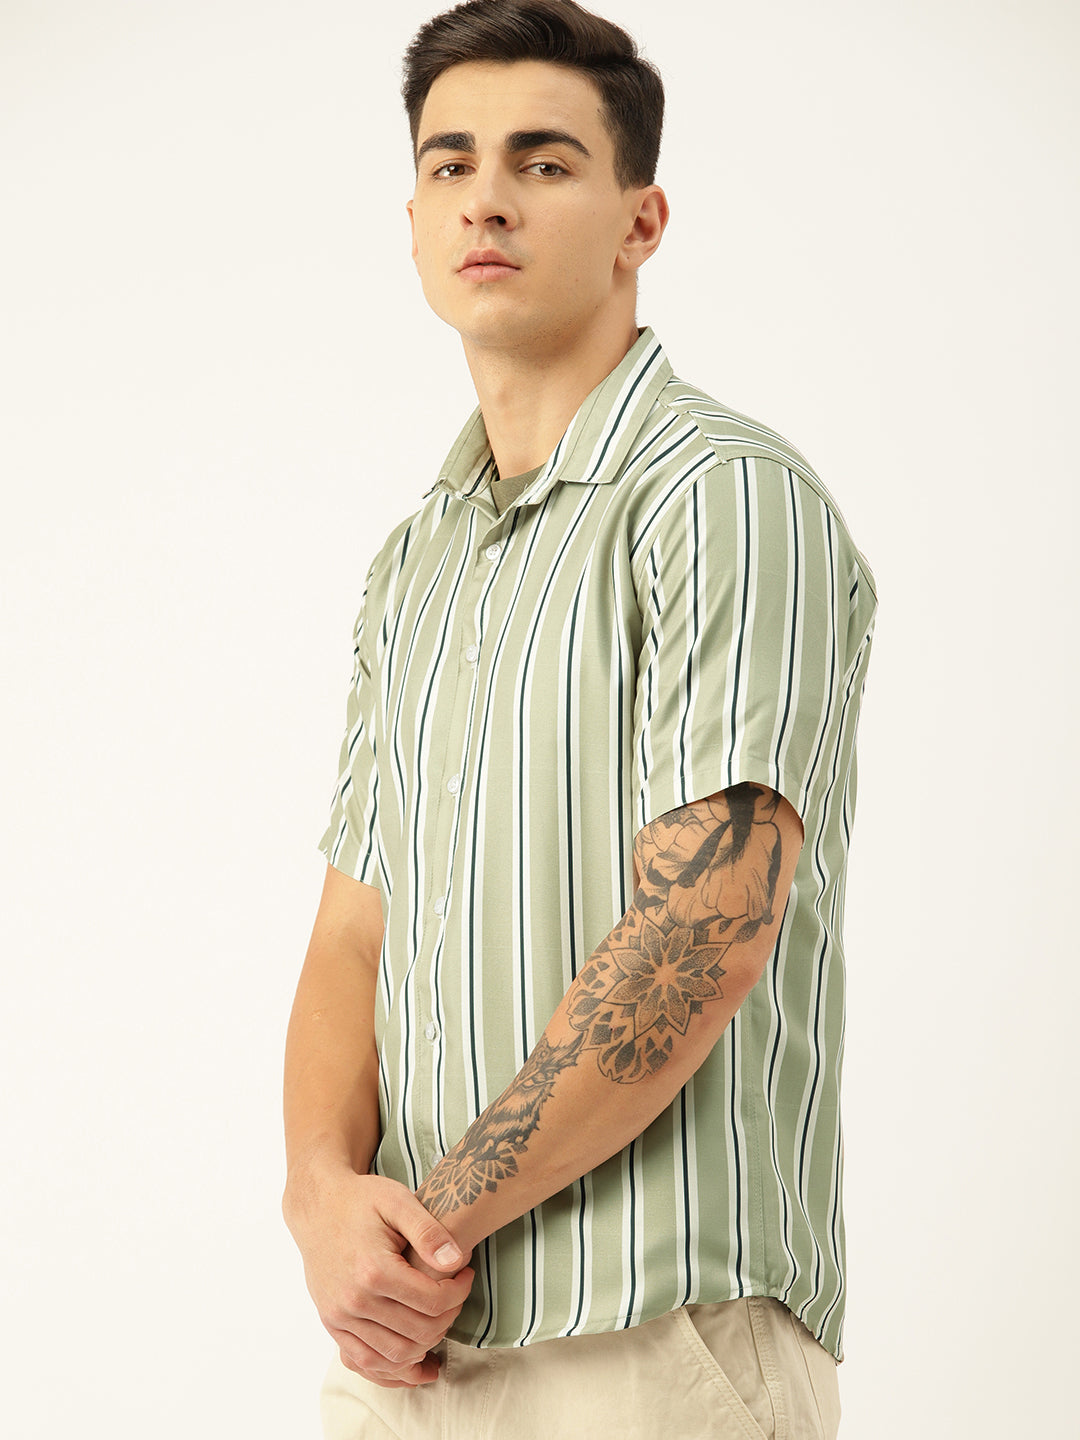 Luxrio Men's Stripped Half Sleeves Casual Shirt Green